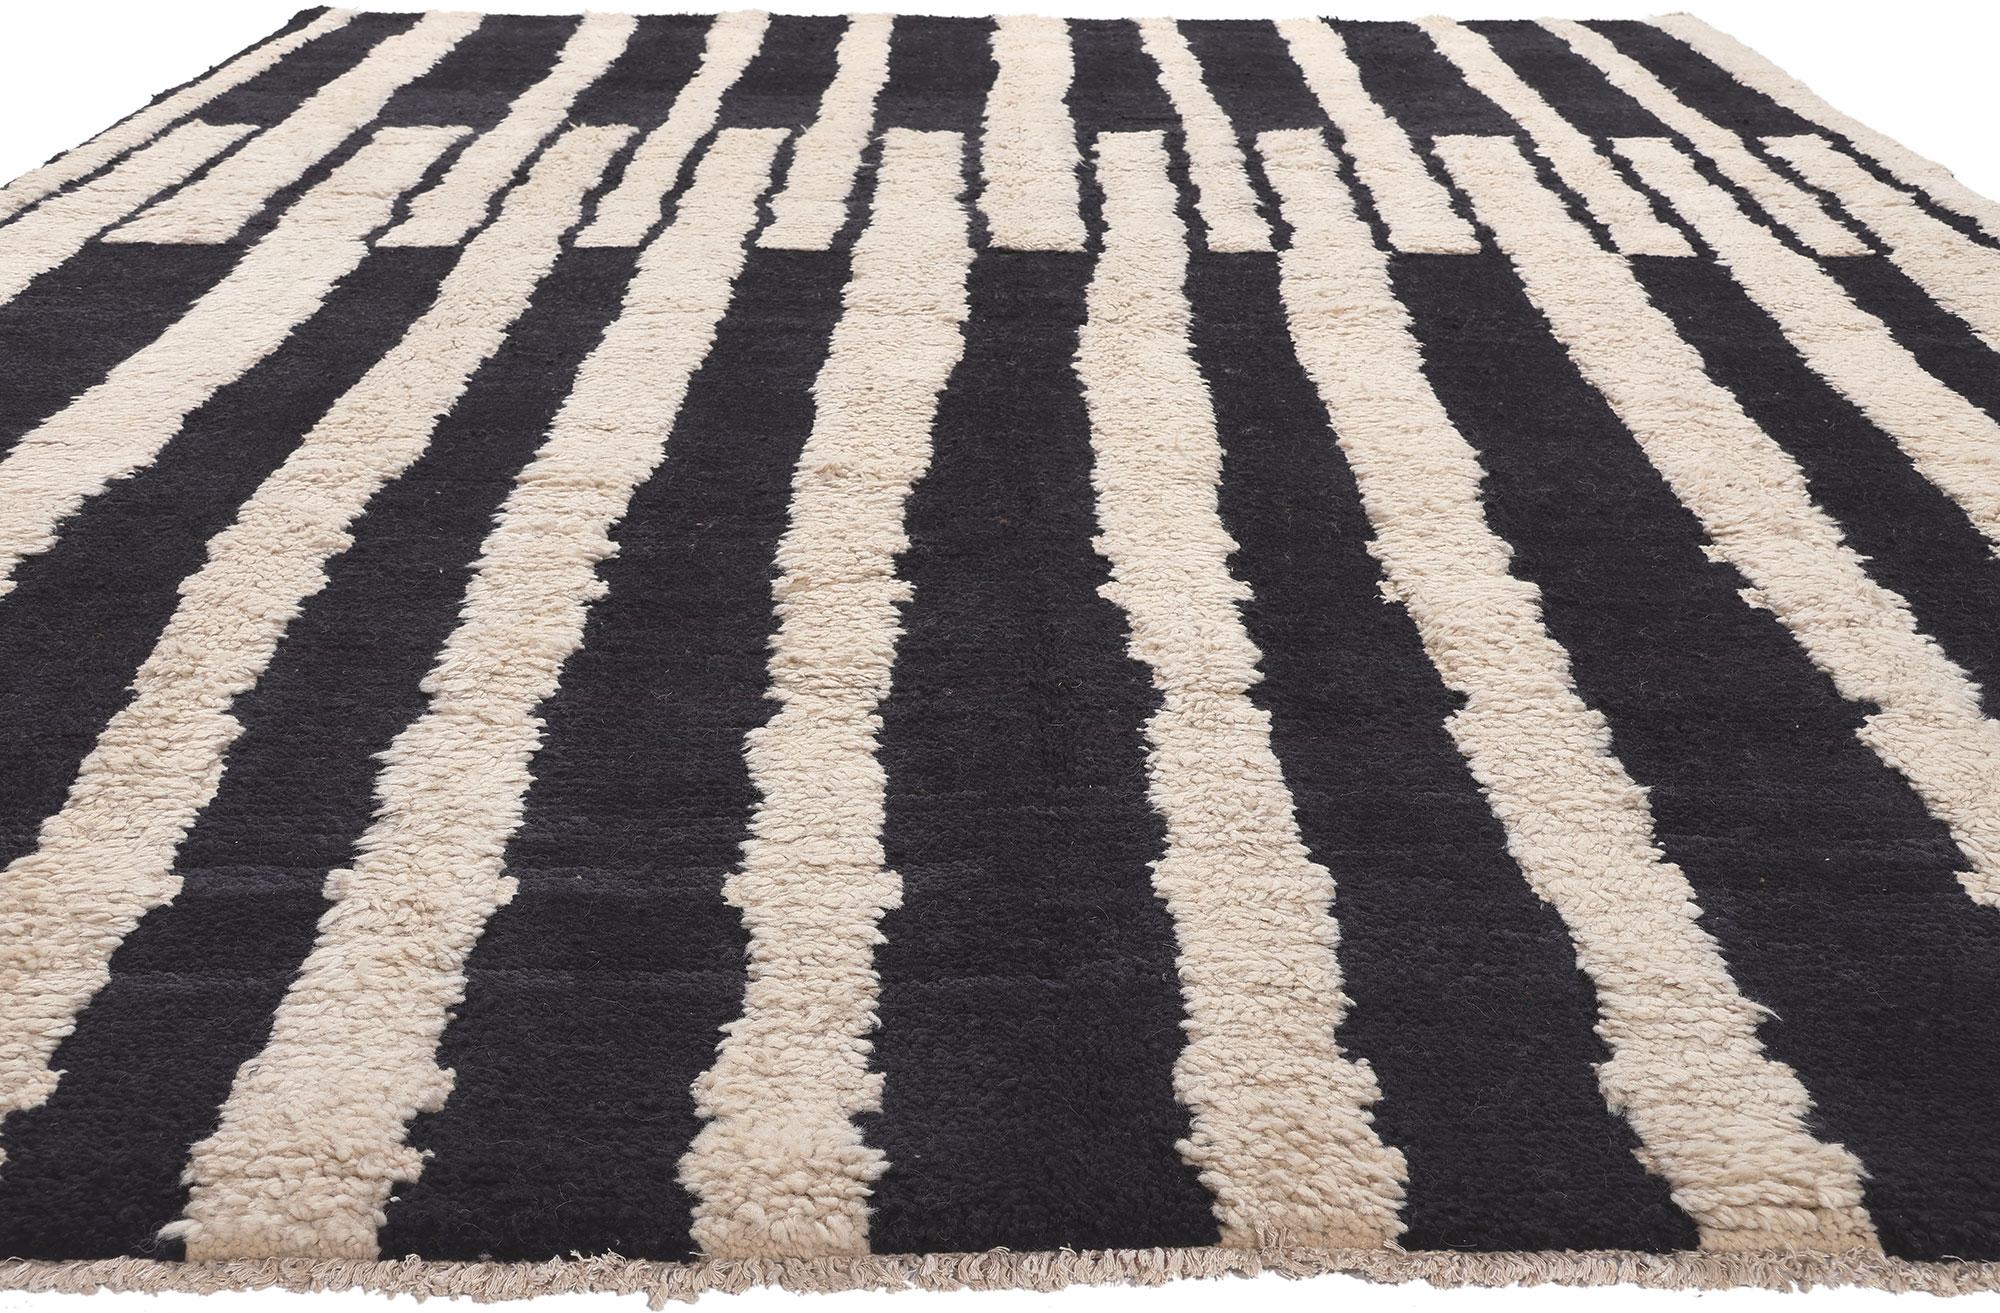 Wool Modern Moroccan Rug Inspired by Josef Albers with Holistic Bauhaus Design For Sale